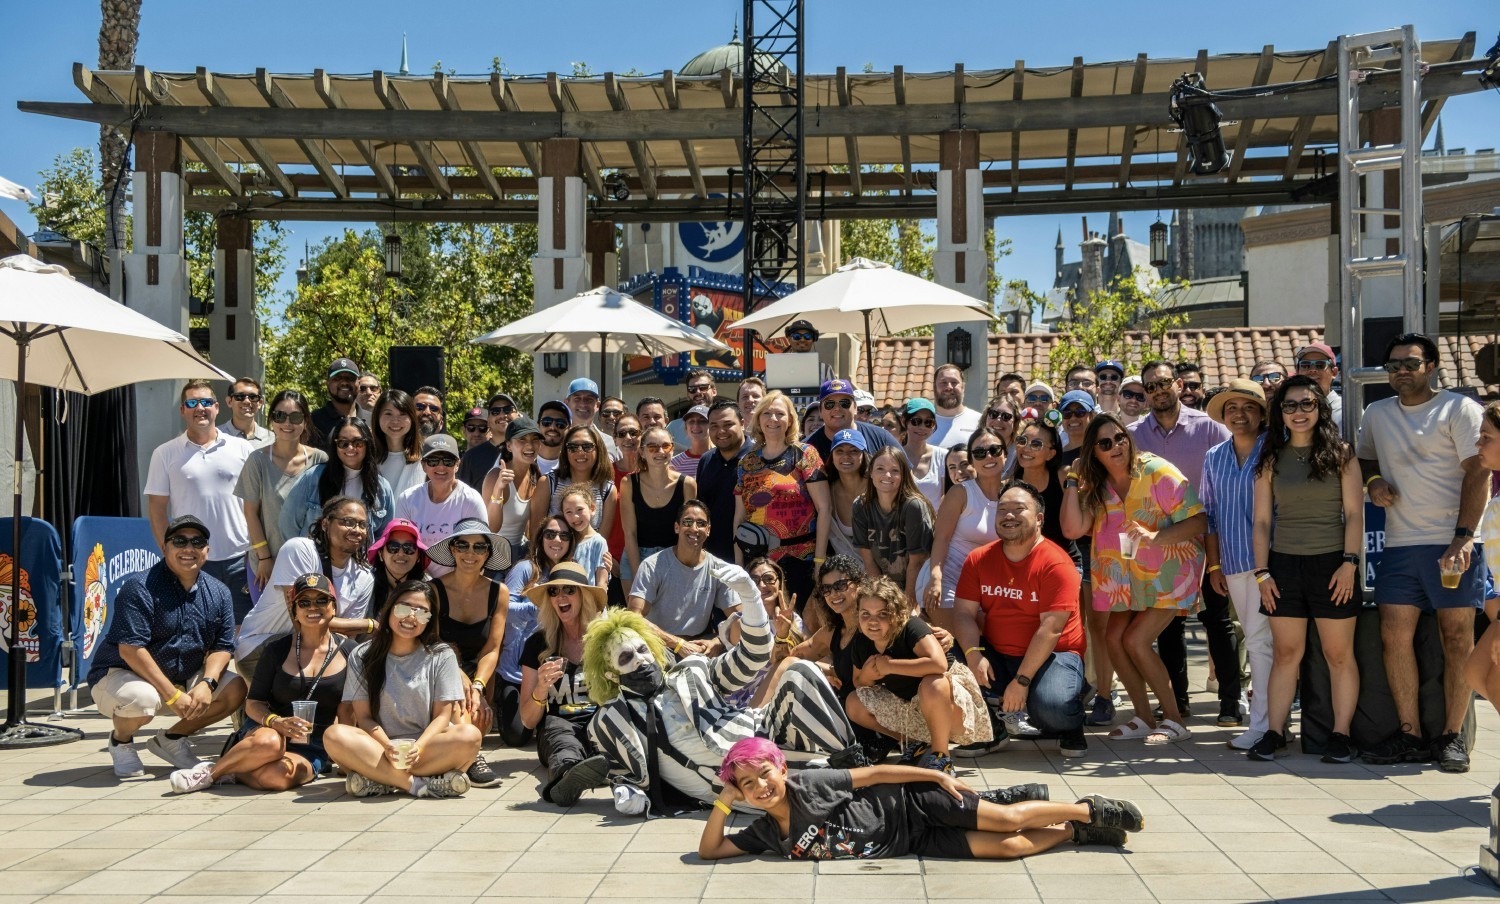 Professionals and guests enjoying CNM's annual West Coast Summer Party at Universal Studios with Beetle Juice